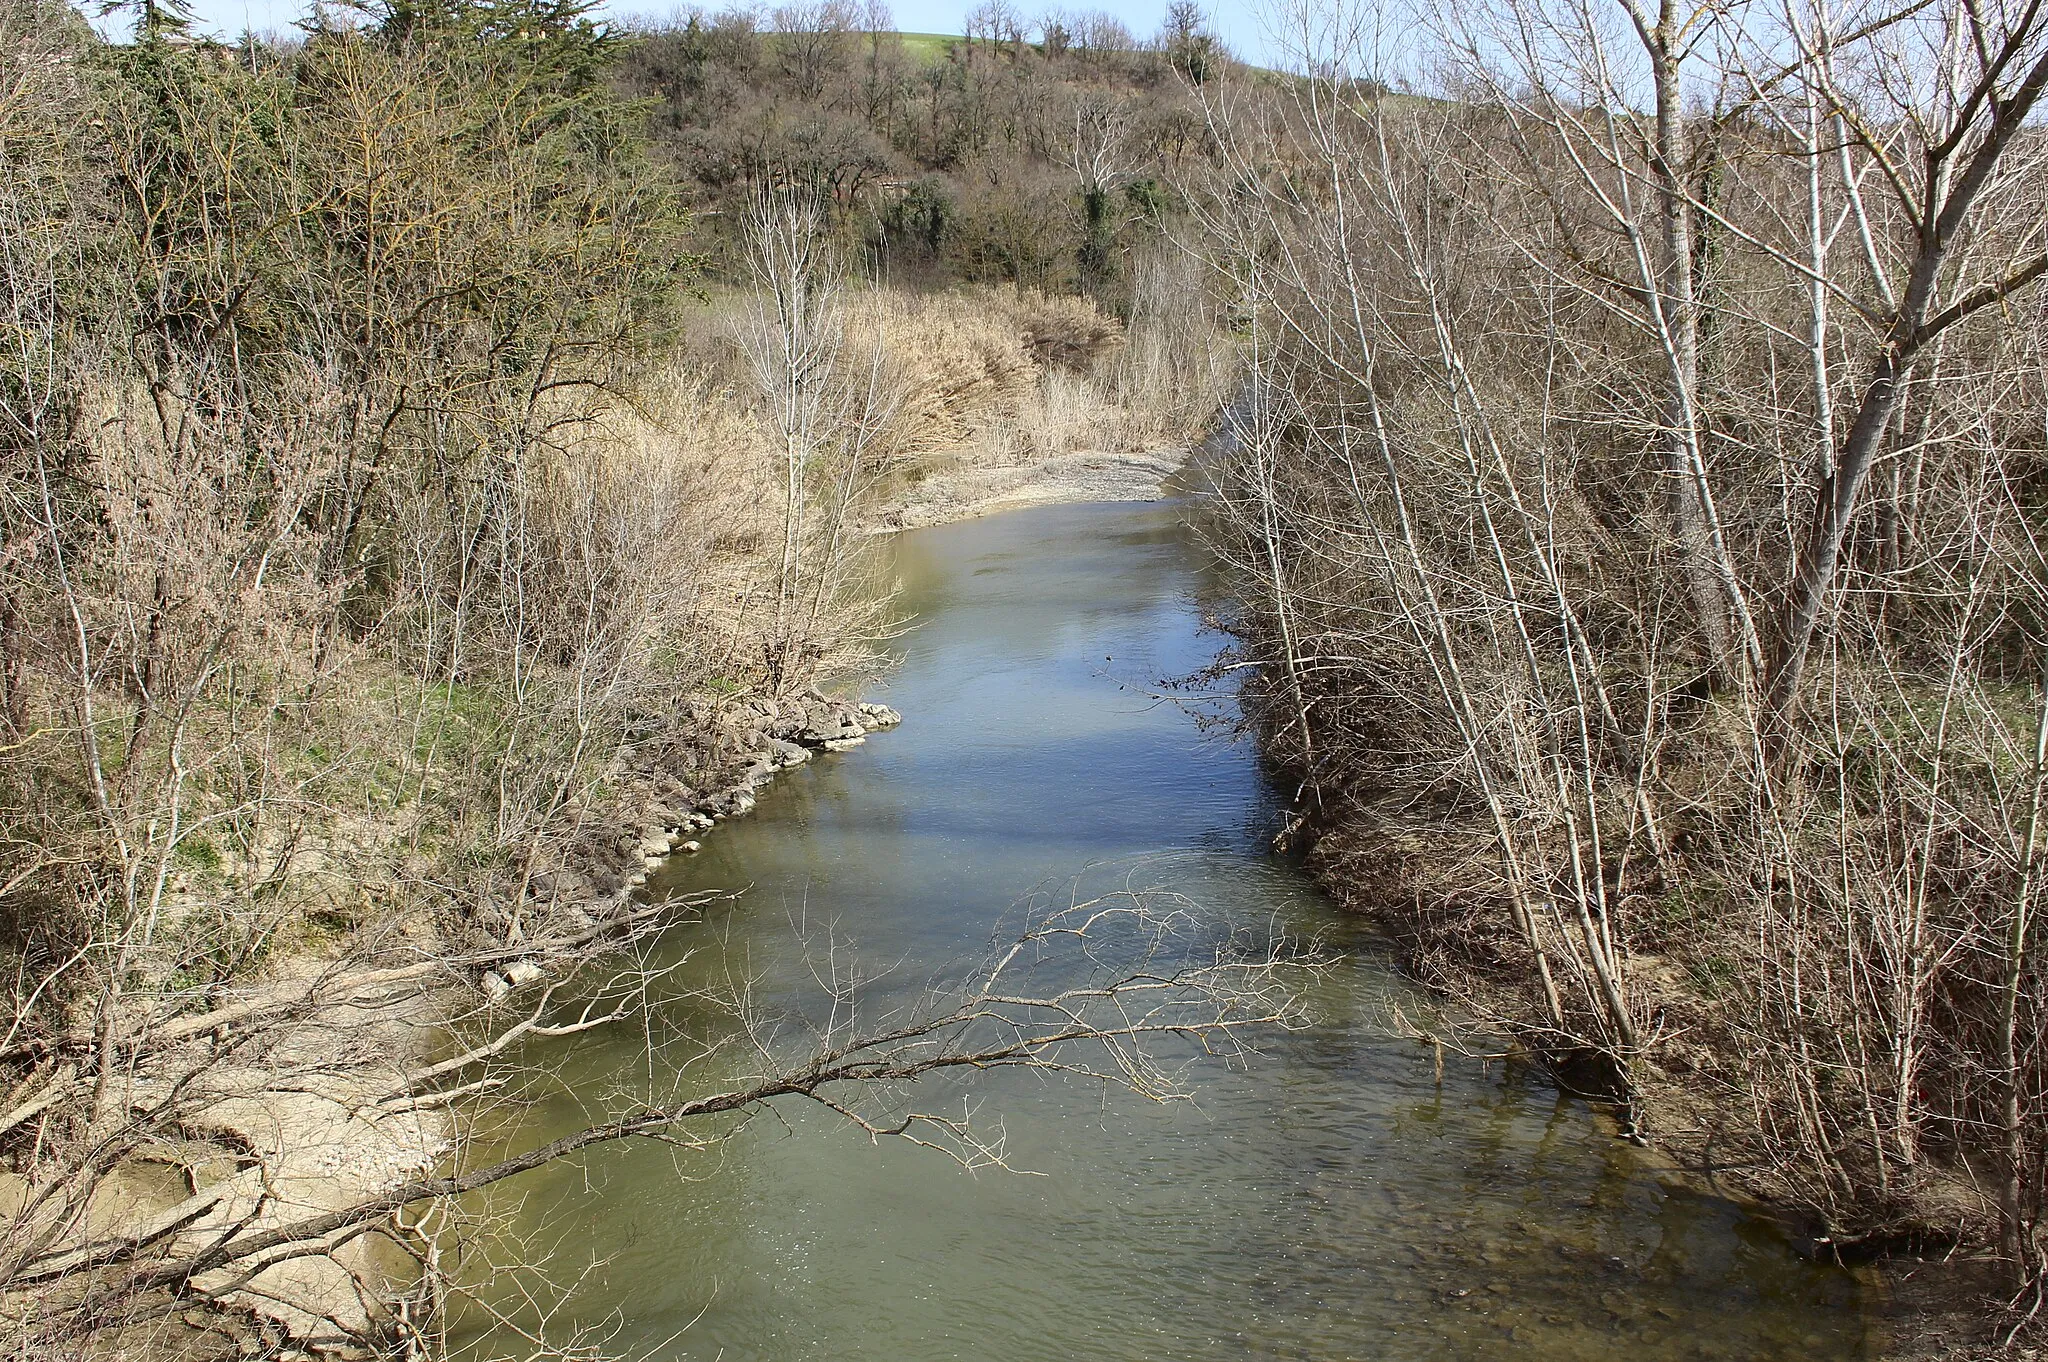 Photo showing: The Nestore river near Morcella, hamlet of Marsciano, Province of Perugia, Umbria, Italy